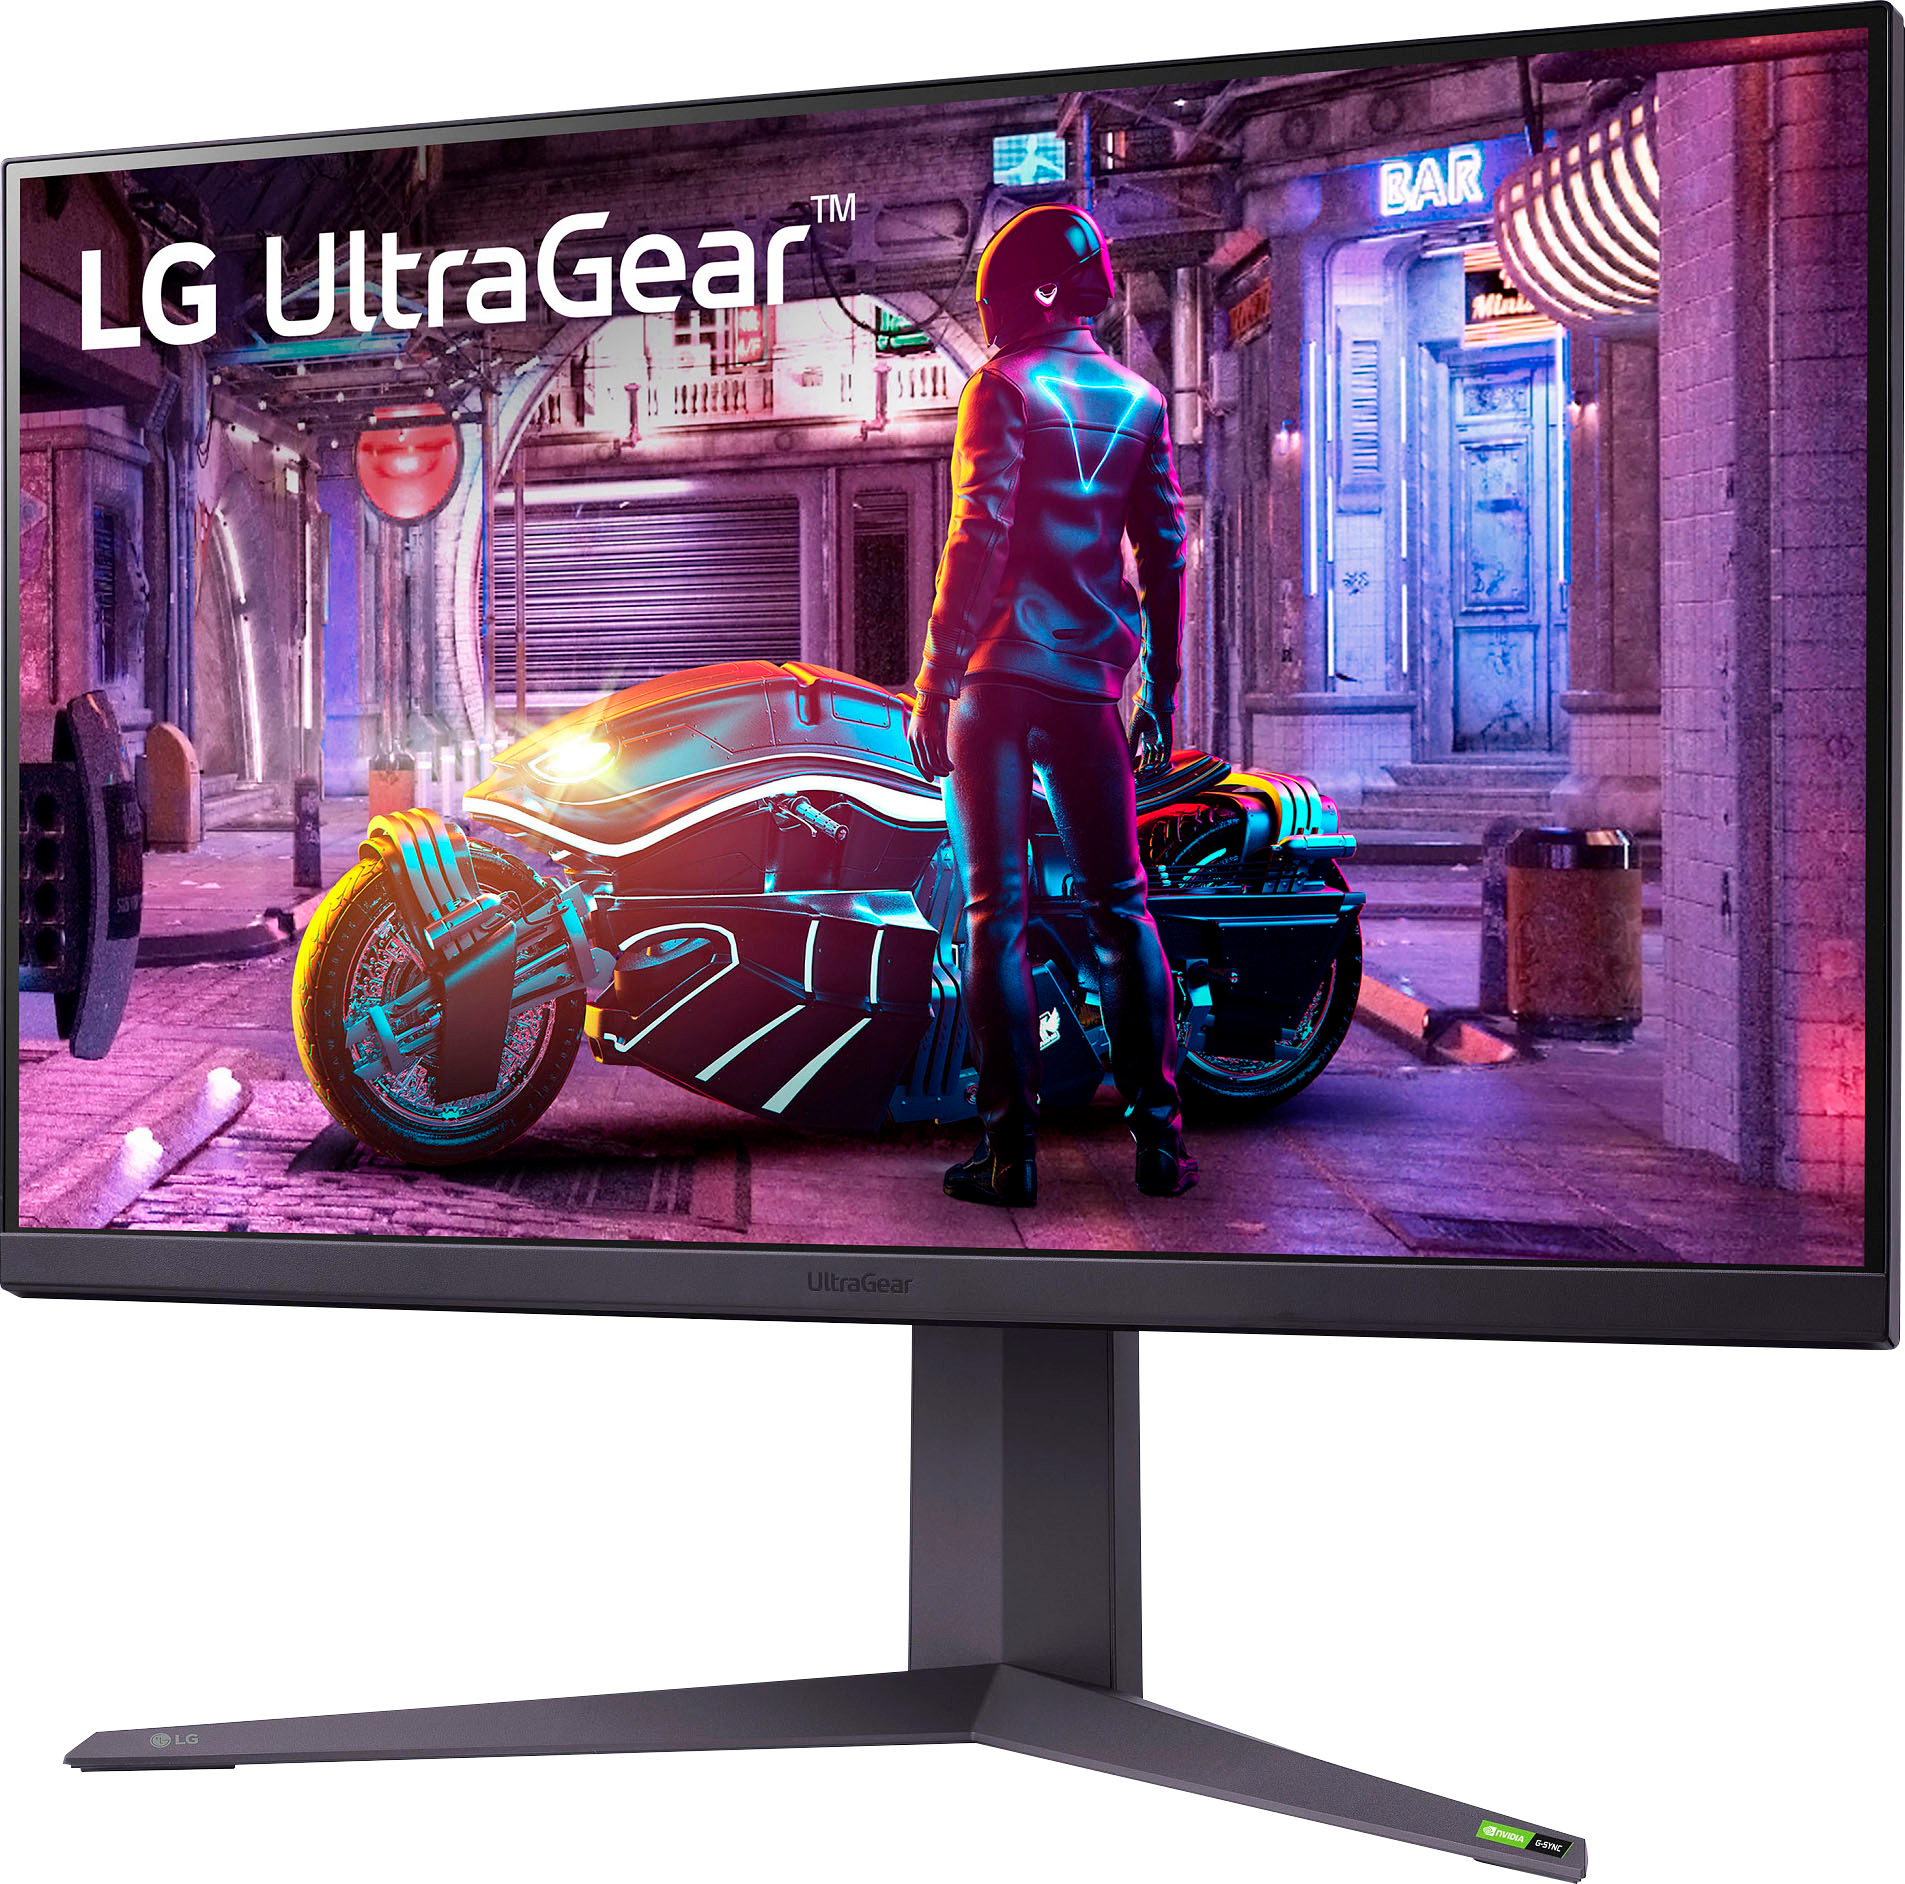 Angle View: LG - UltraGear 32" IPS LED QHD G-SYNC Compatible and AMD FreeSync Premium Pro Monitor with HDR (HDMI, DisplayPort)